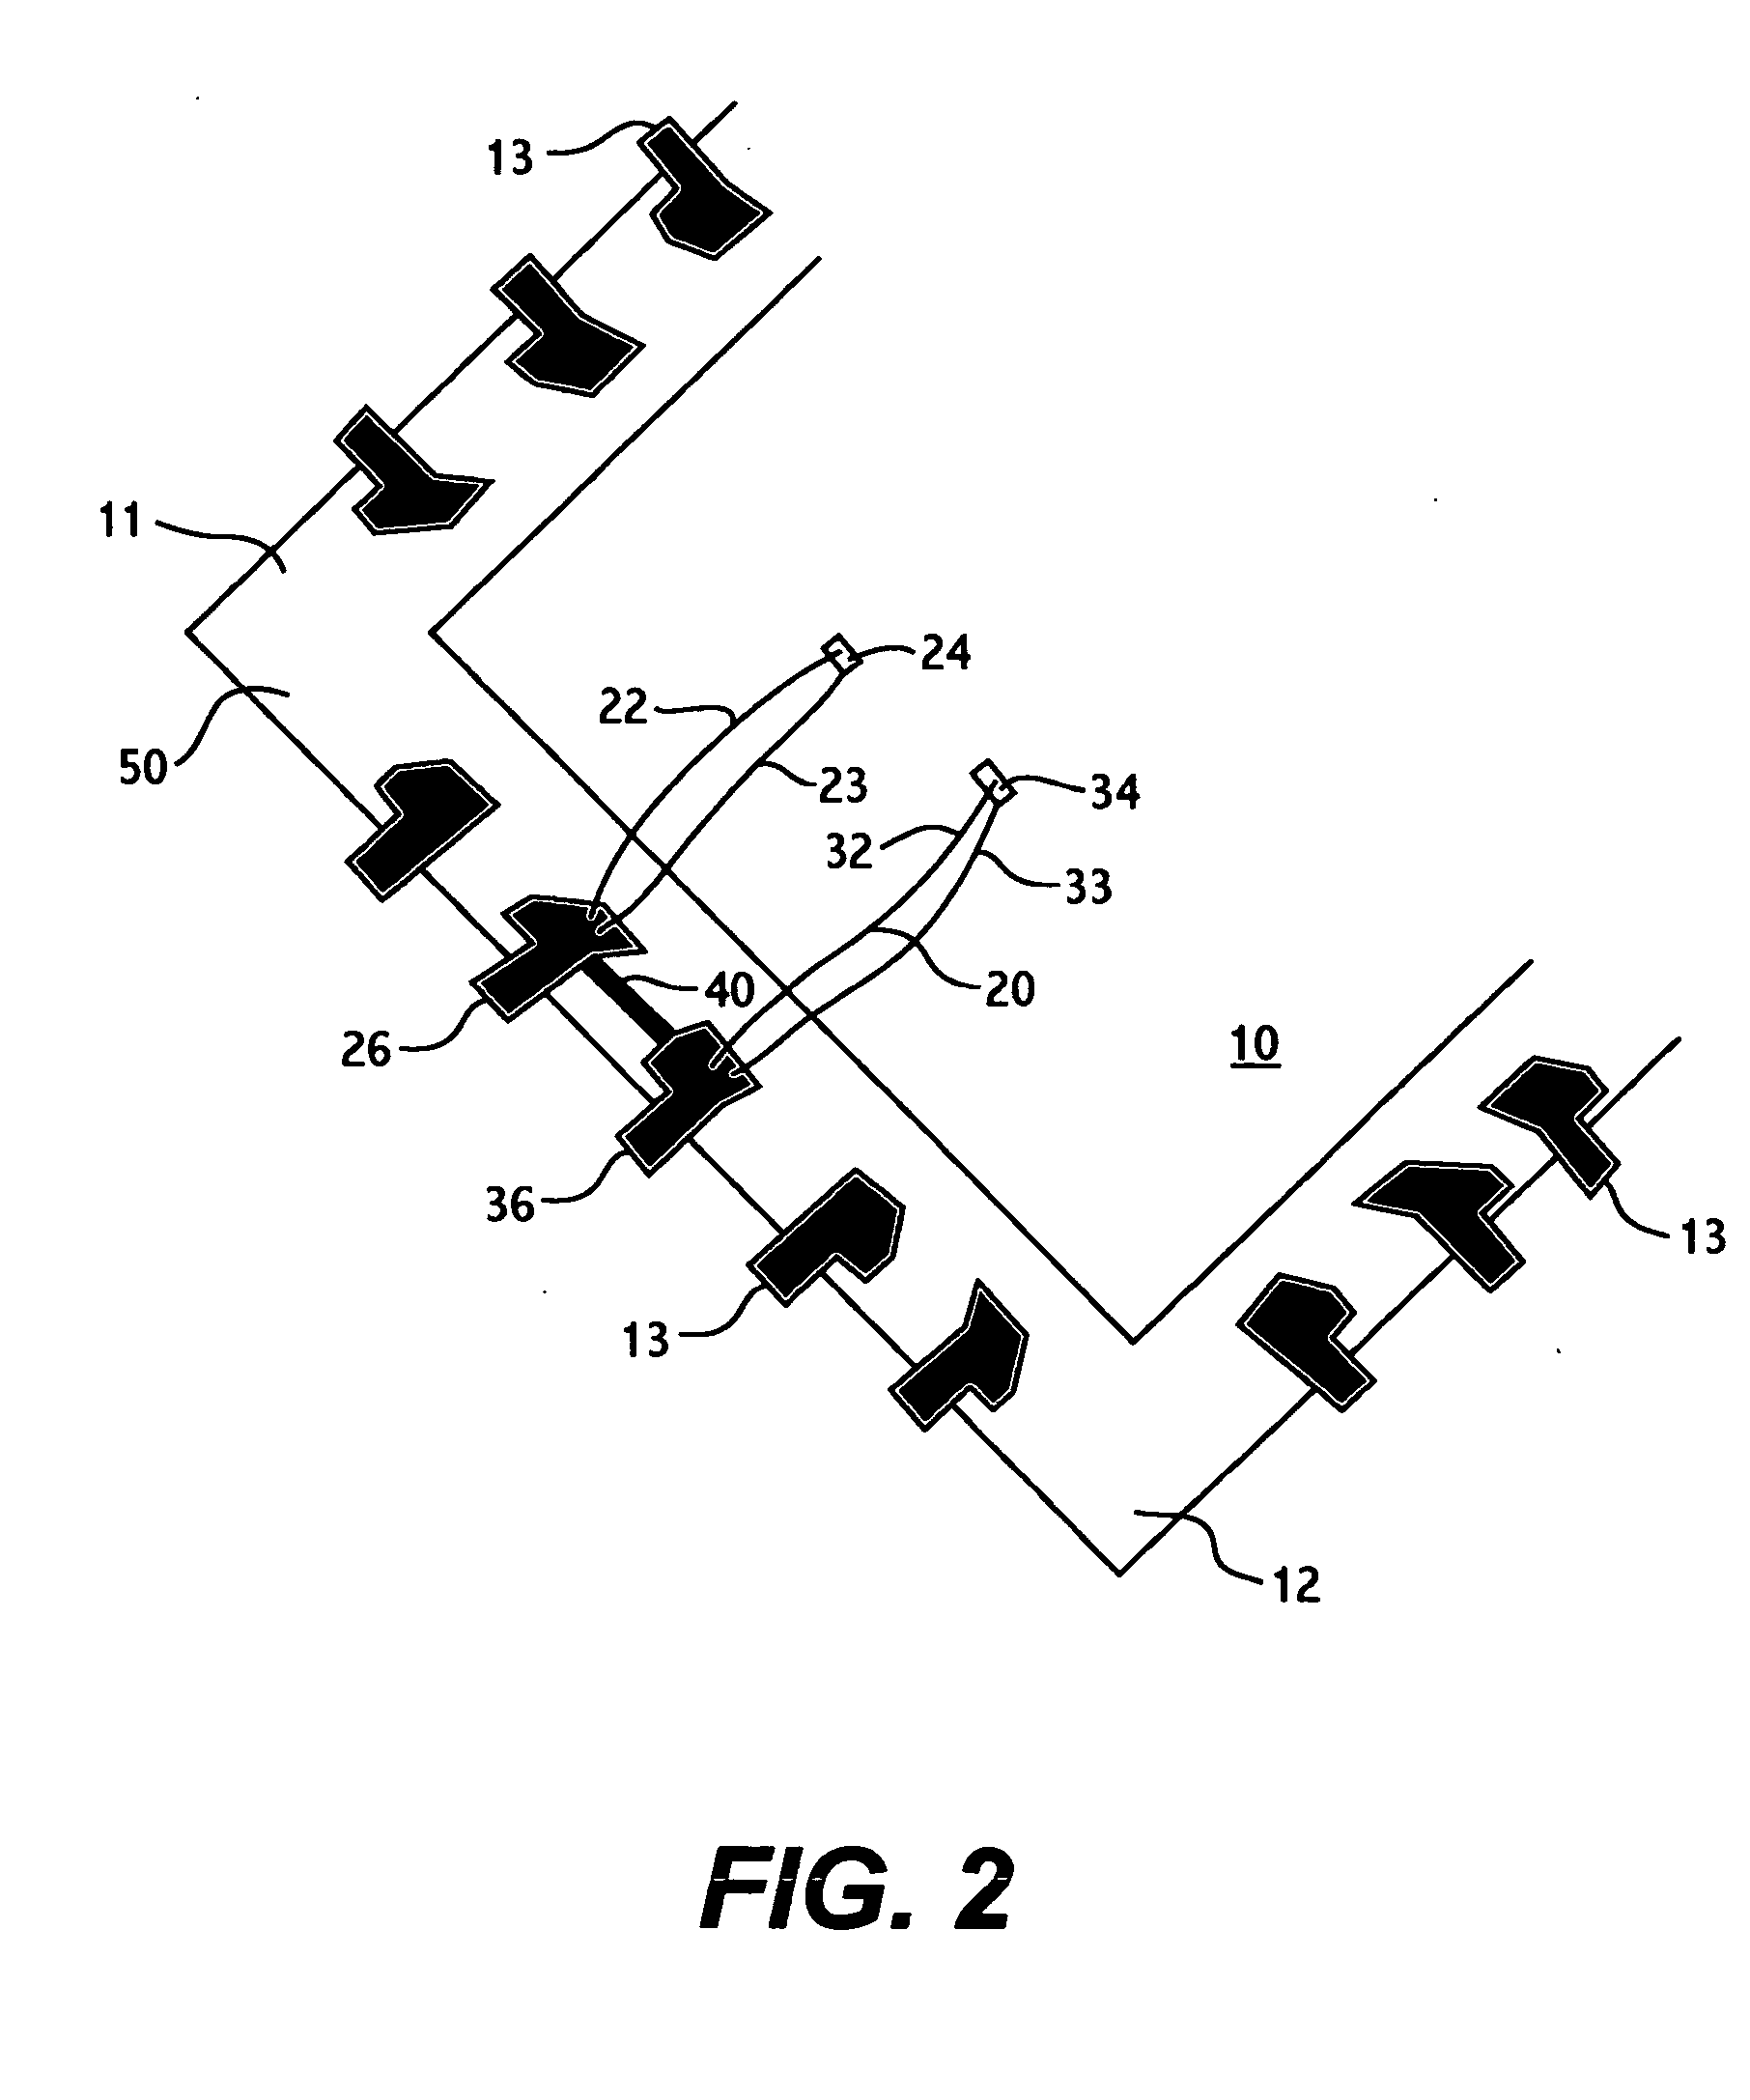 Integrated circuit package having an inductance loop formed from a multi-loop configuration